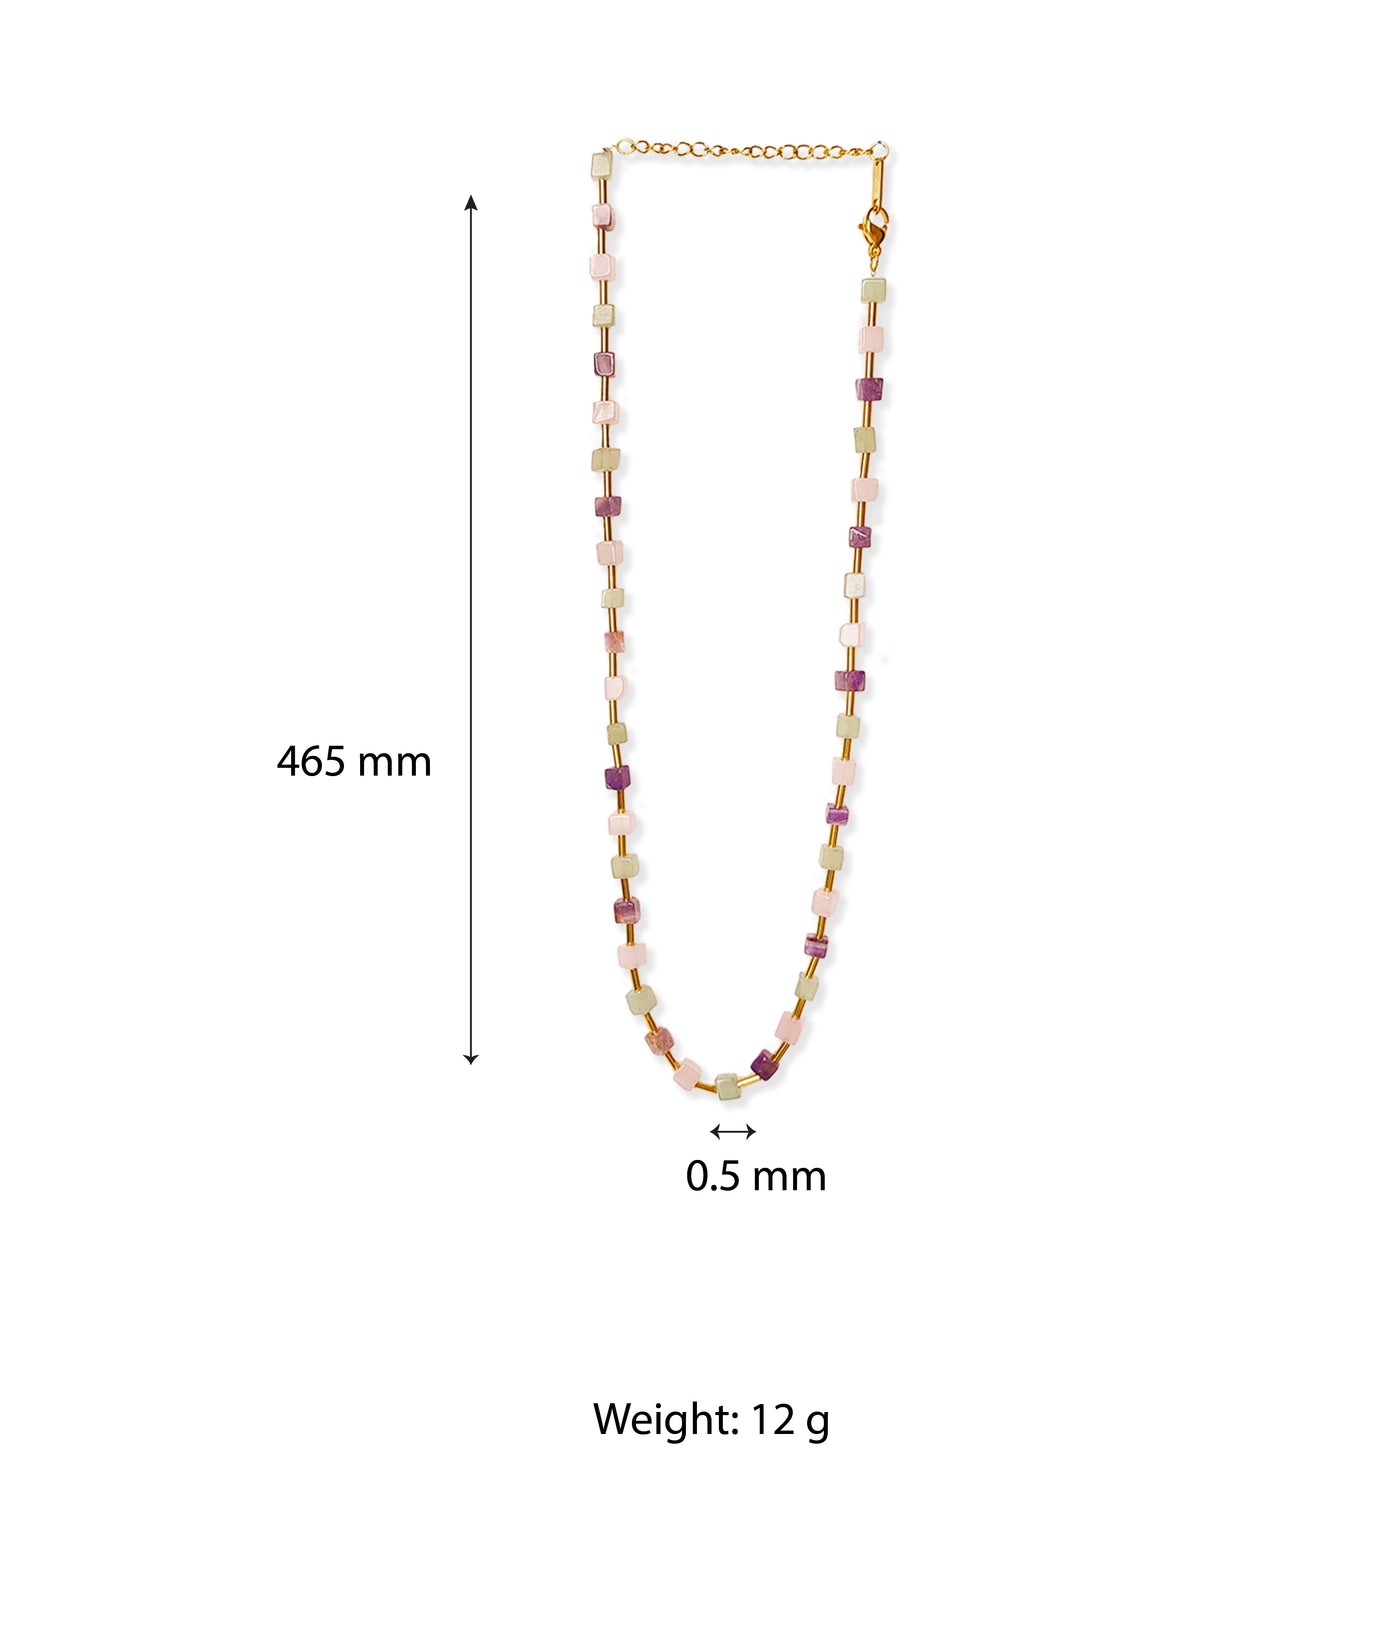 The Rose Beads Necklace